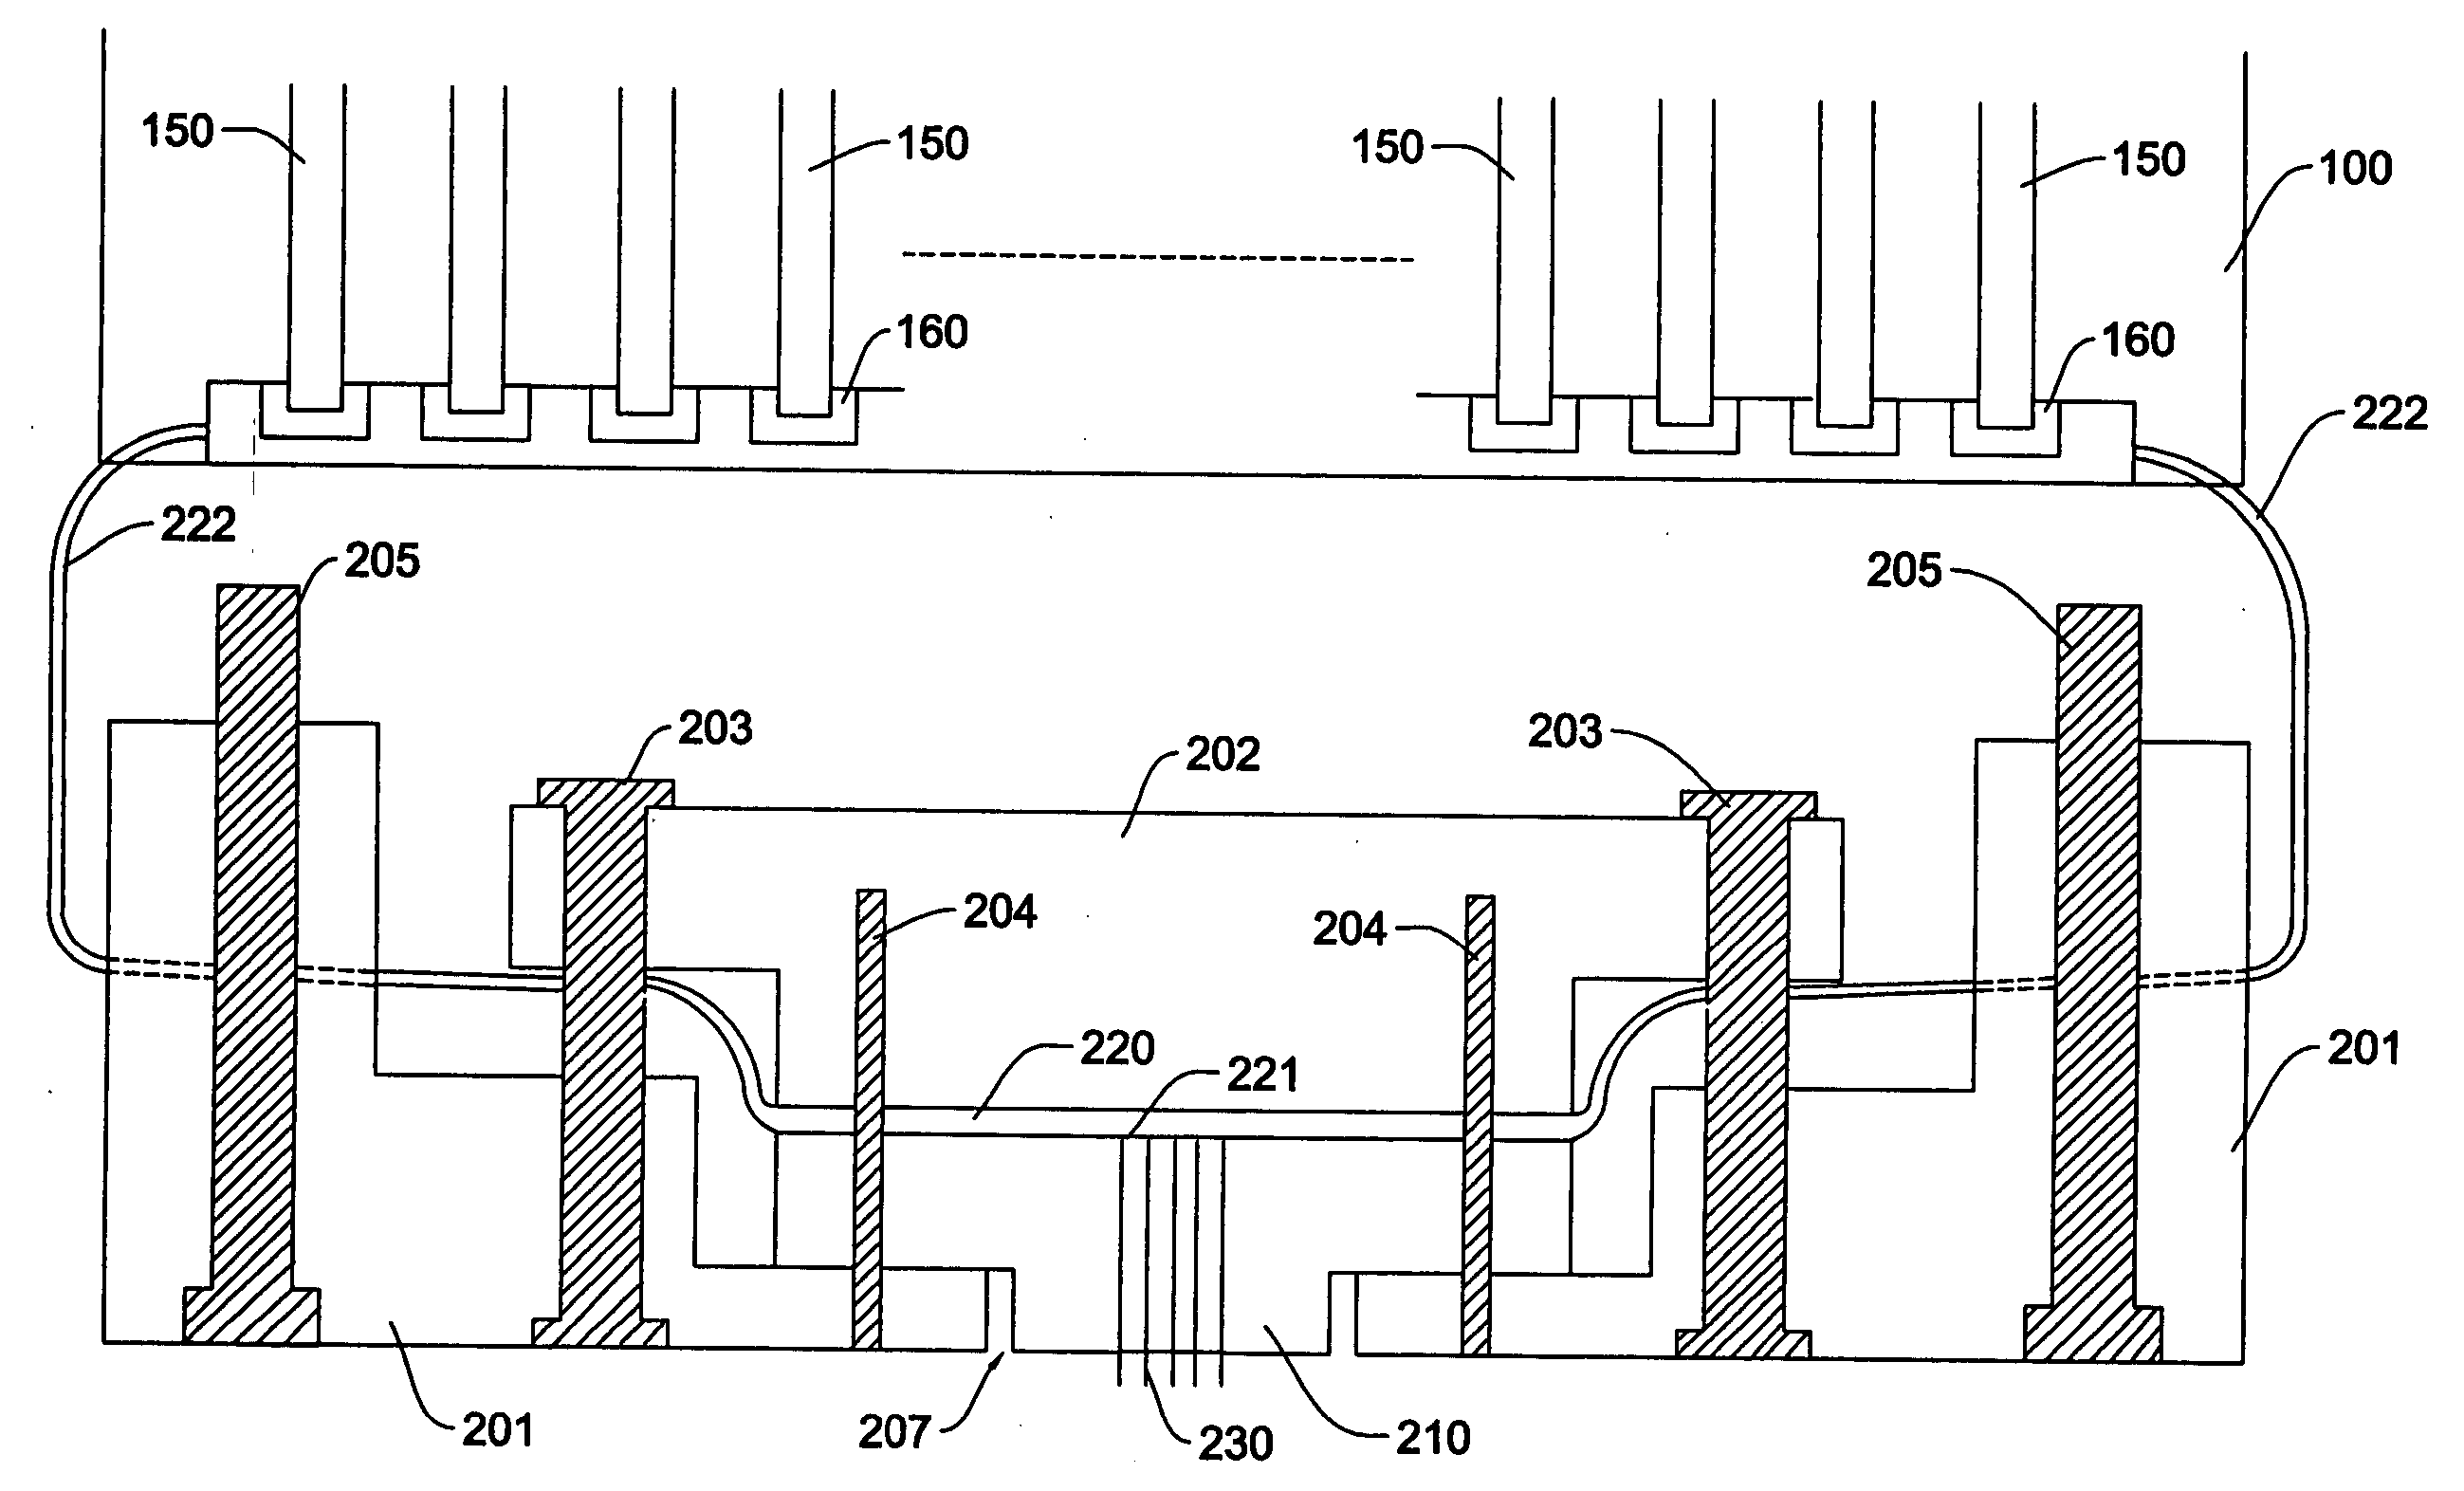 Probe contact system using flexible printed circuit board